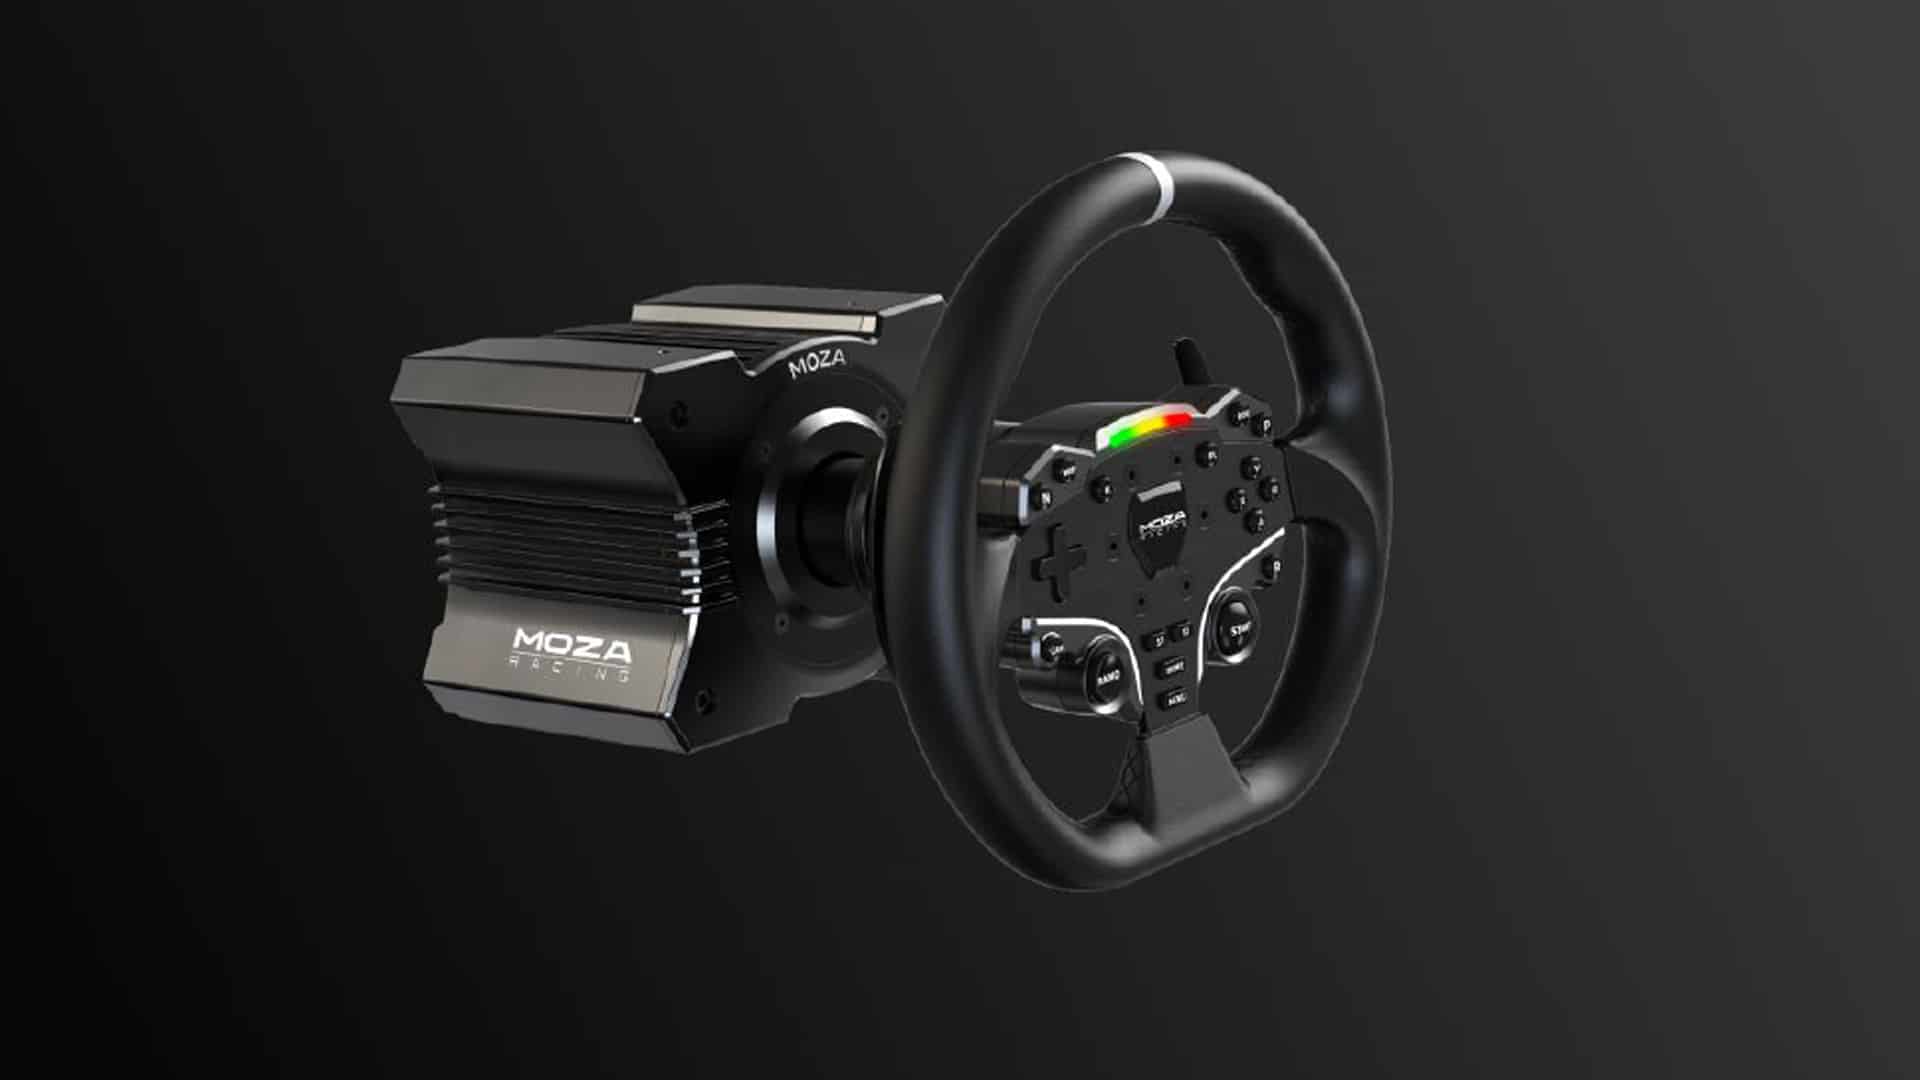 Moza's R5 direct drive sim racing bundle costs a lowly $599